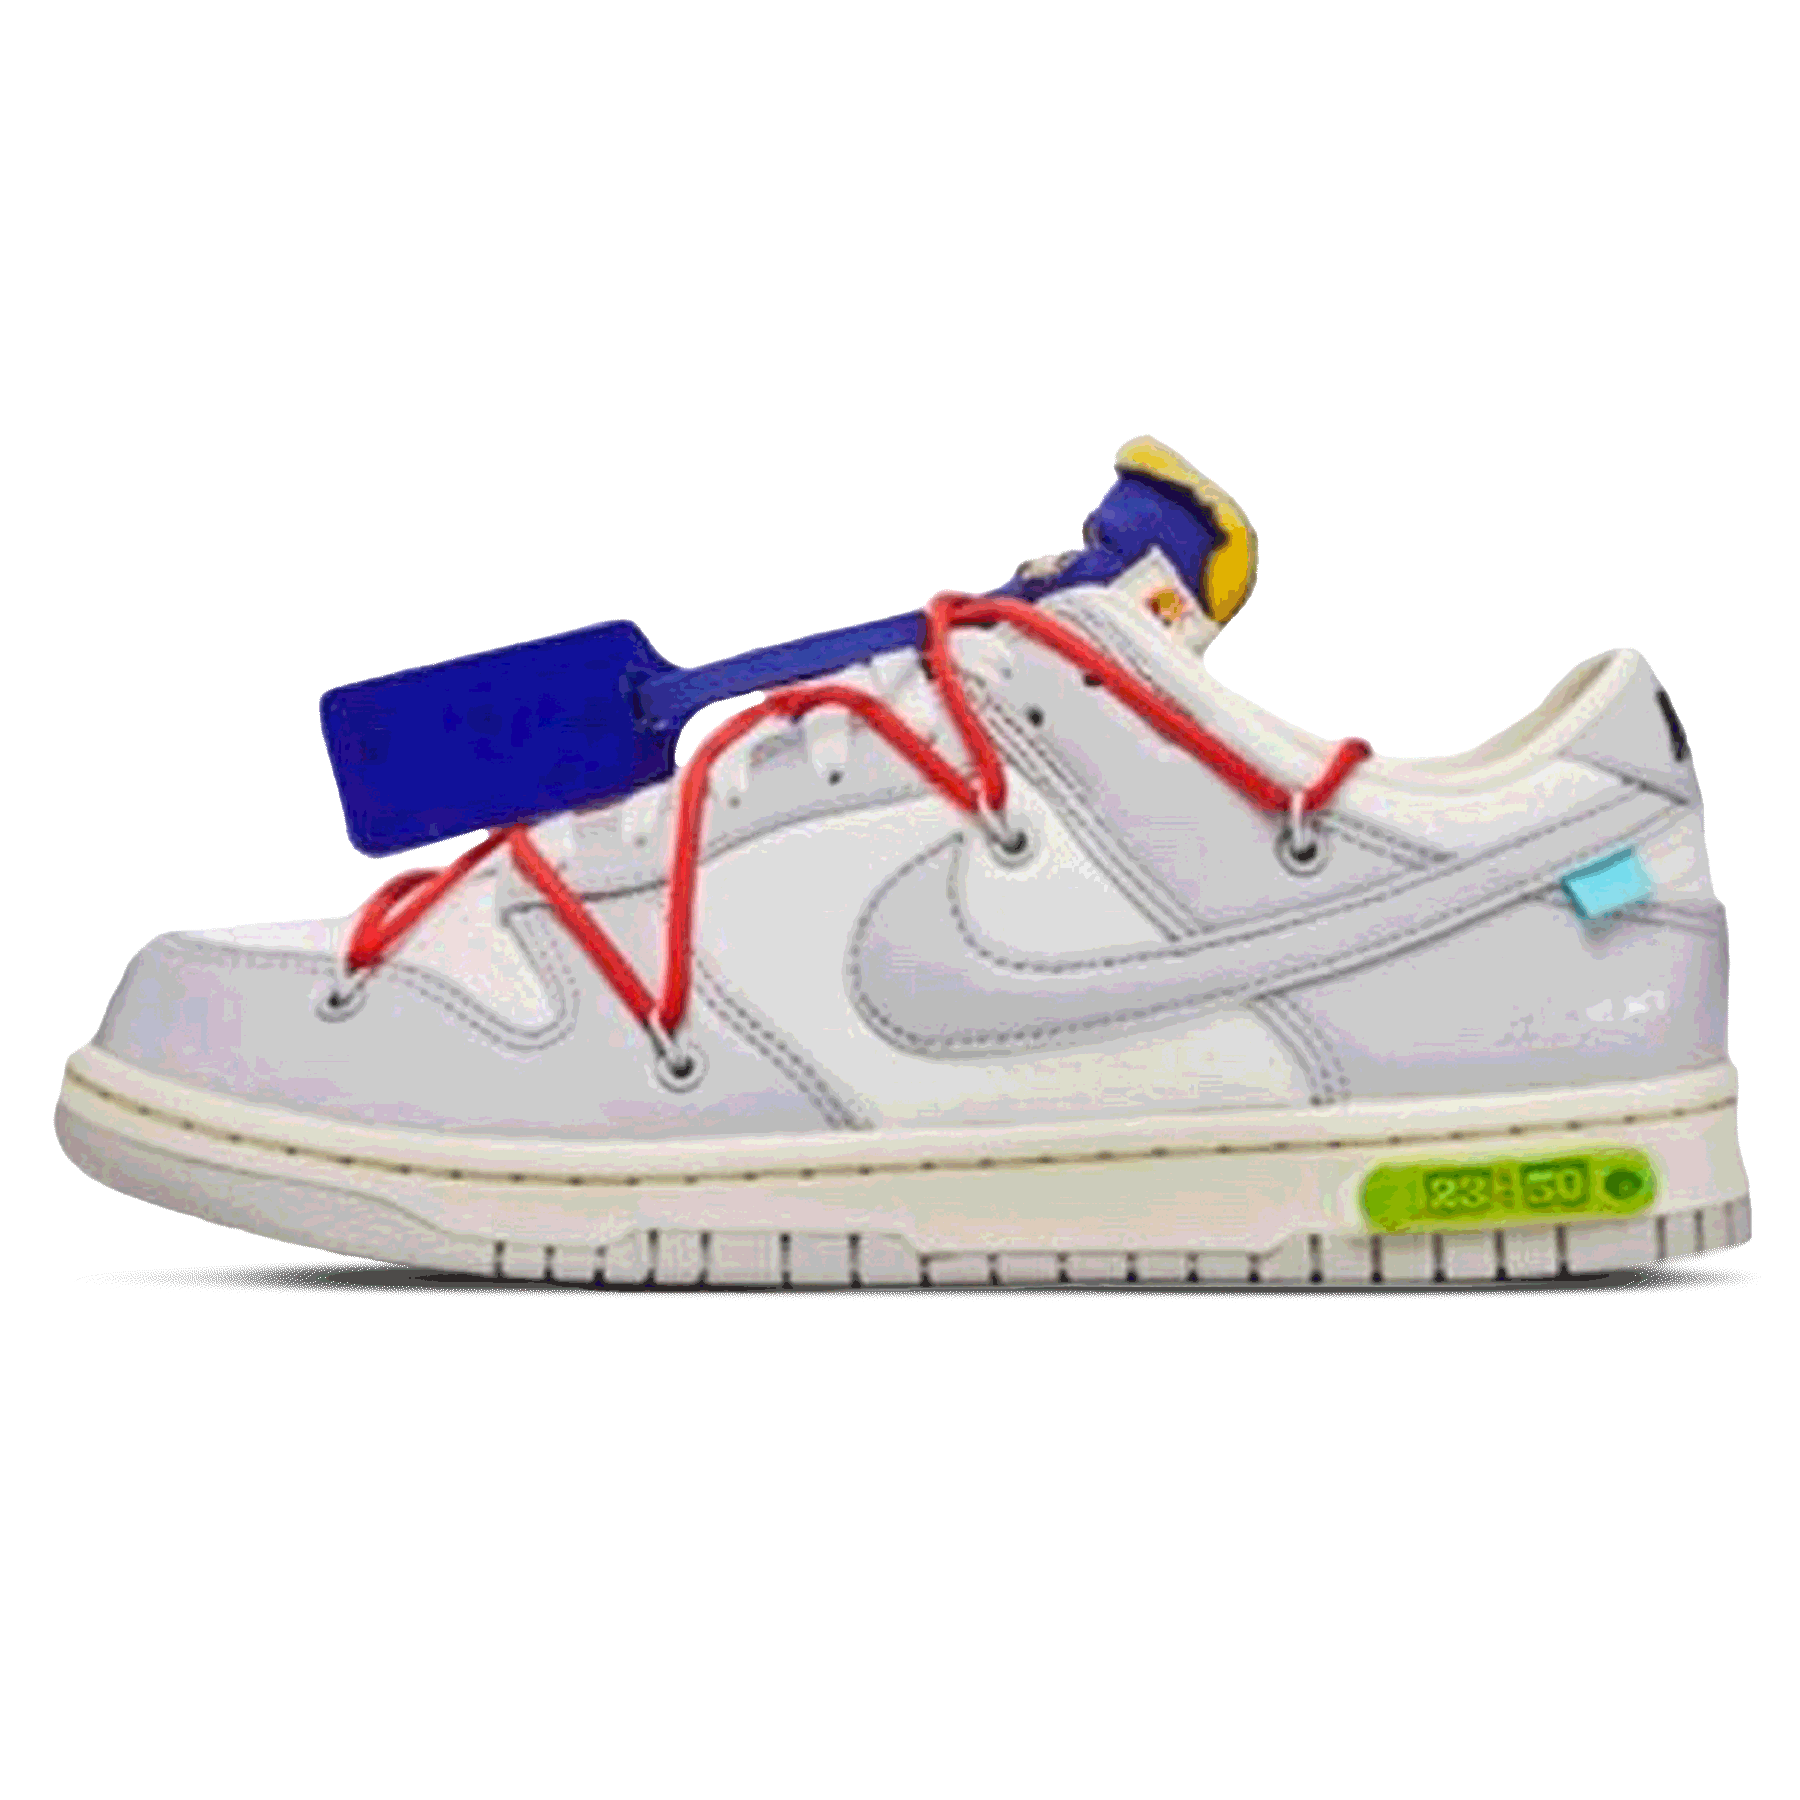 Margaret Mitchell Competidores mi White x Nike Dunk Low 'Lot 23 of 50' — HopeoutreachflShops - Off - nike  lunar trainers for sale in michigan today